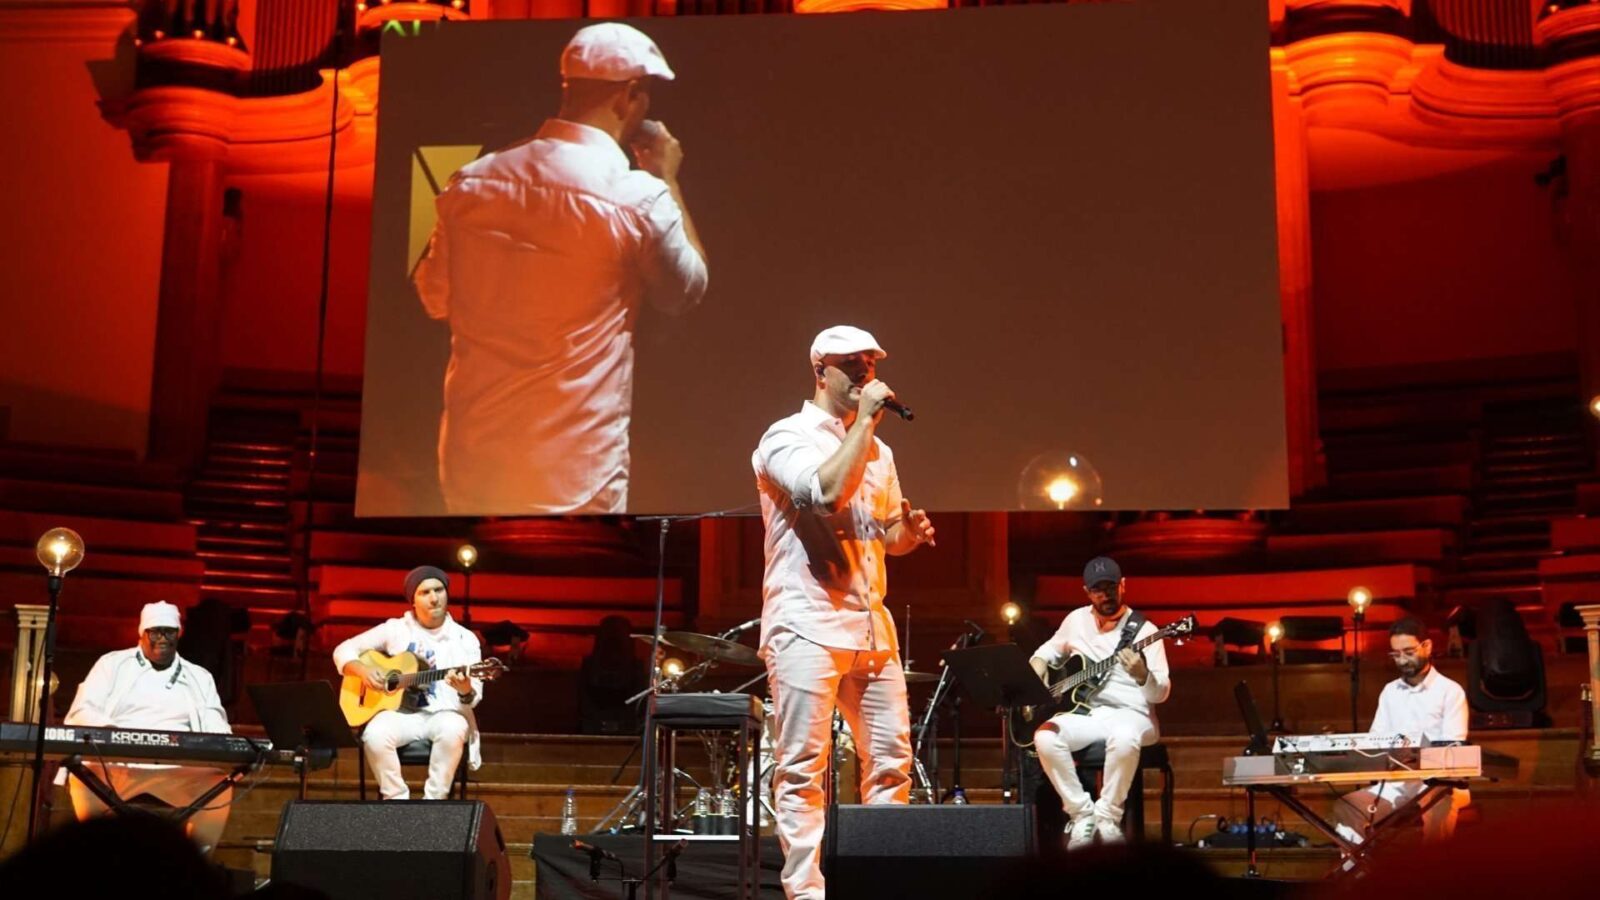 Maher Zain Concert Live in London